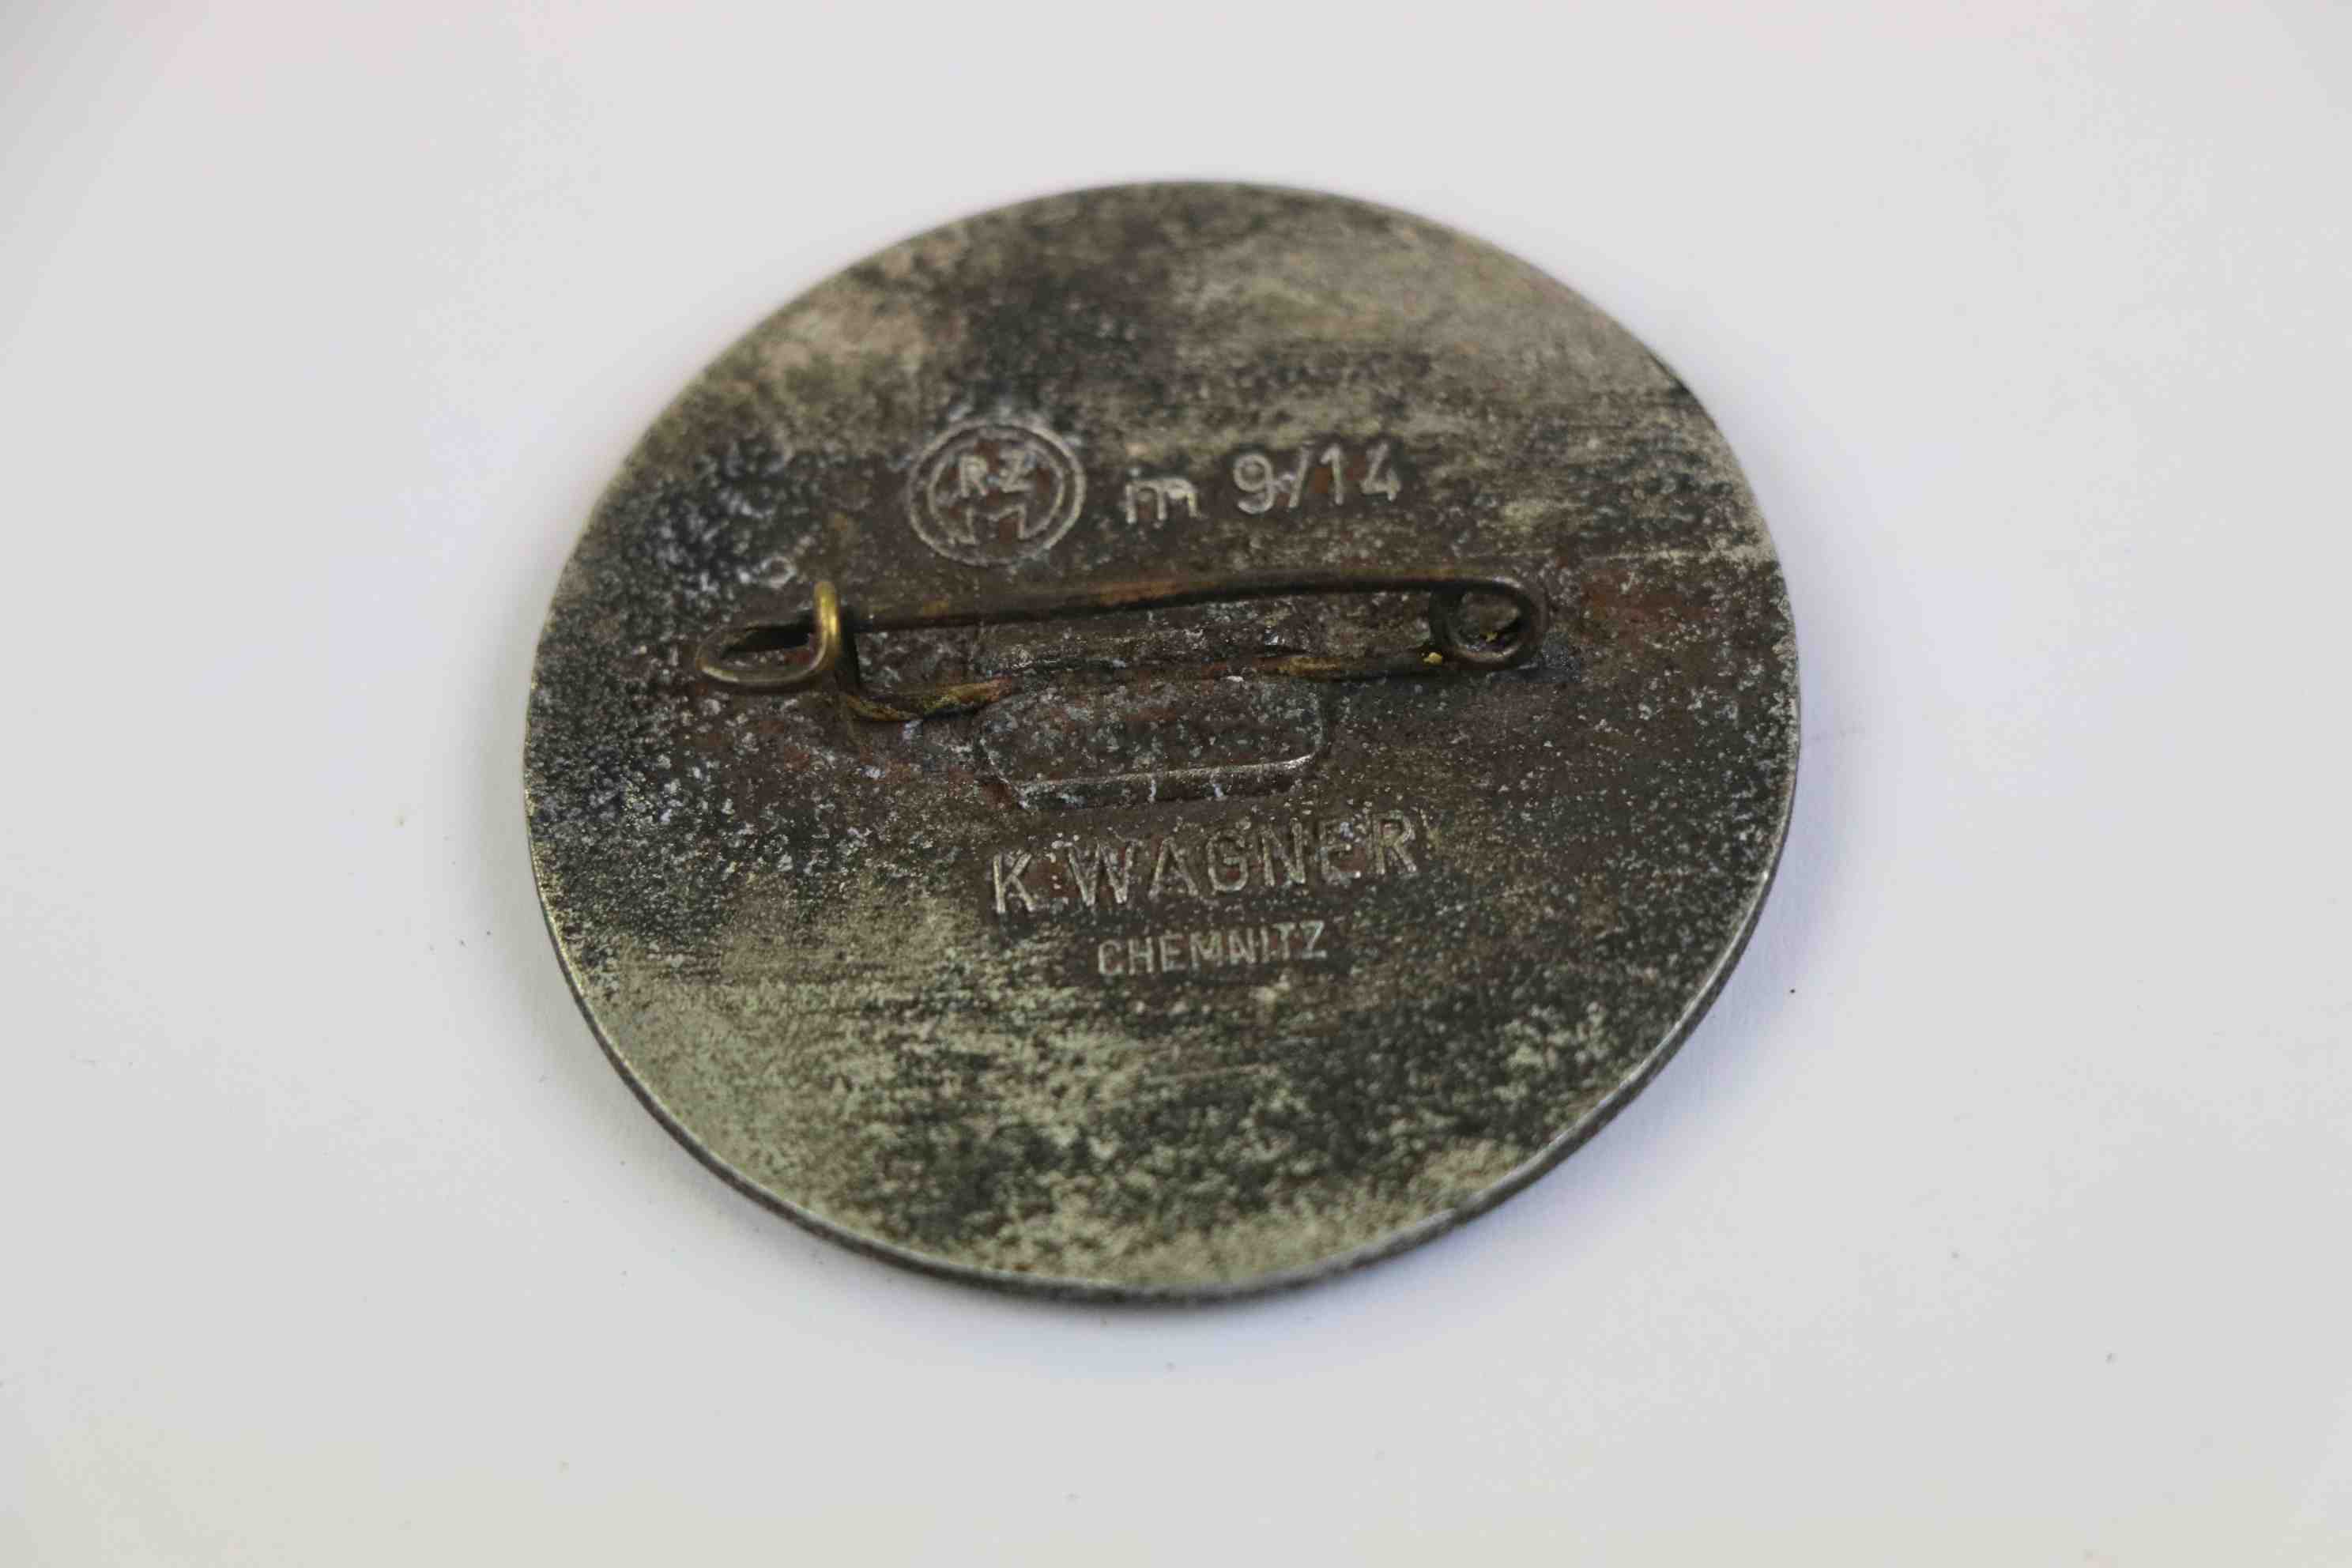 A World War Two / WW2 German 1939 Reichsparteitag Badge With RZM 9/14 K.WAGNER CHEMNITZ To The - Image 6 of 6